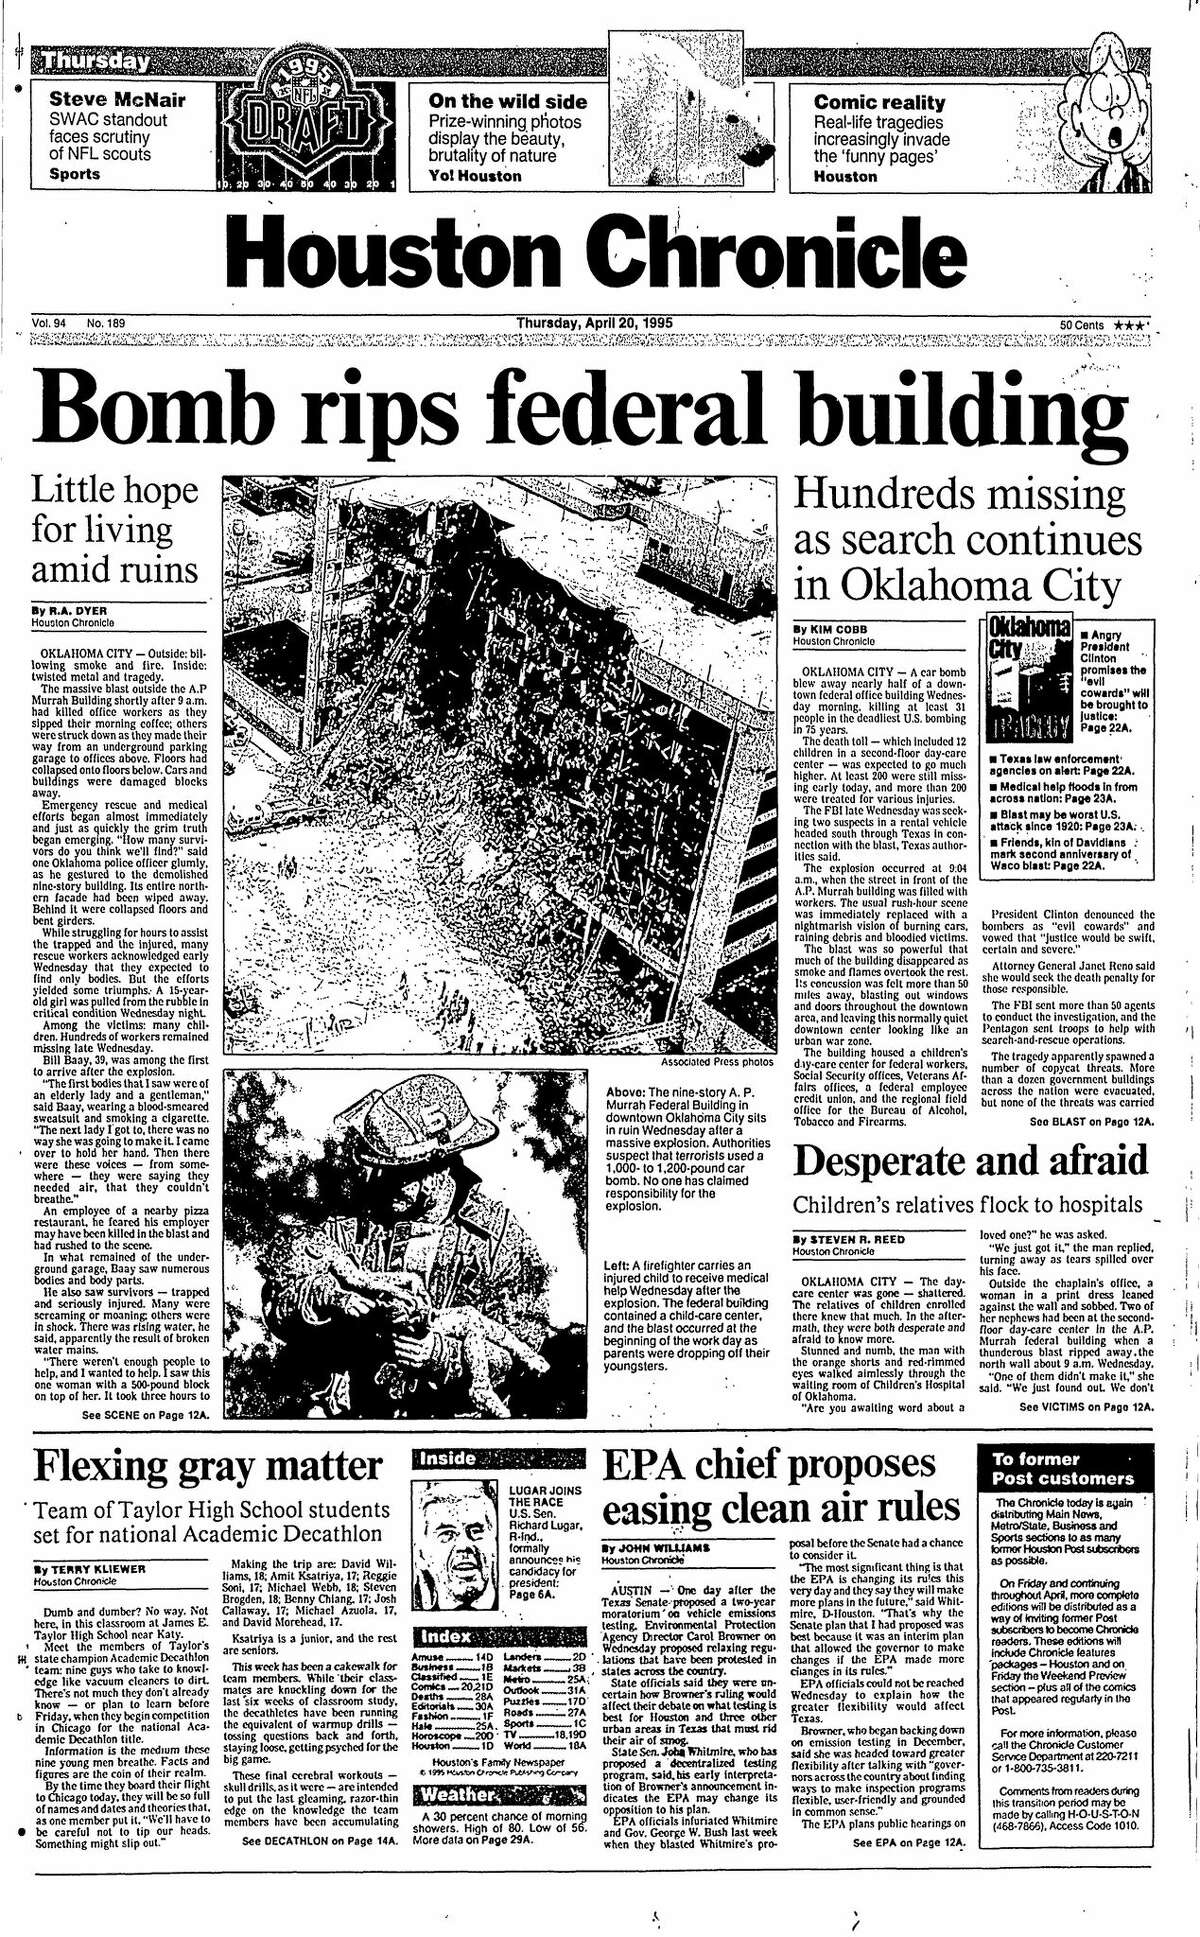 Houston Chronicle front page for April 20, 1995.